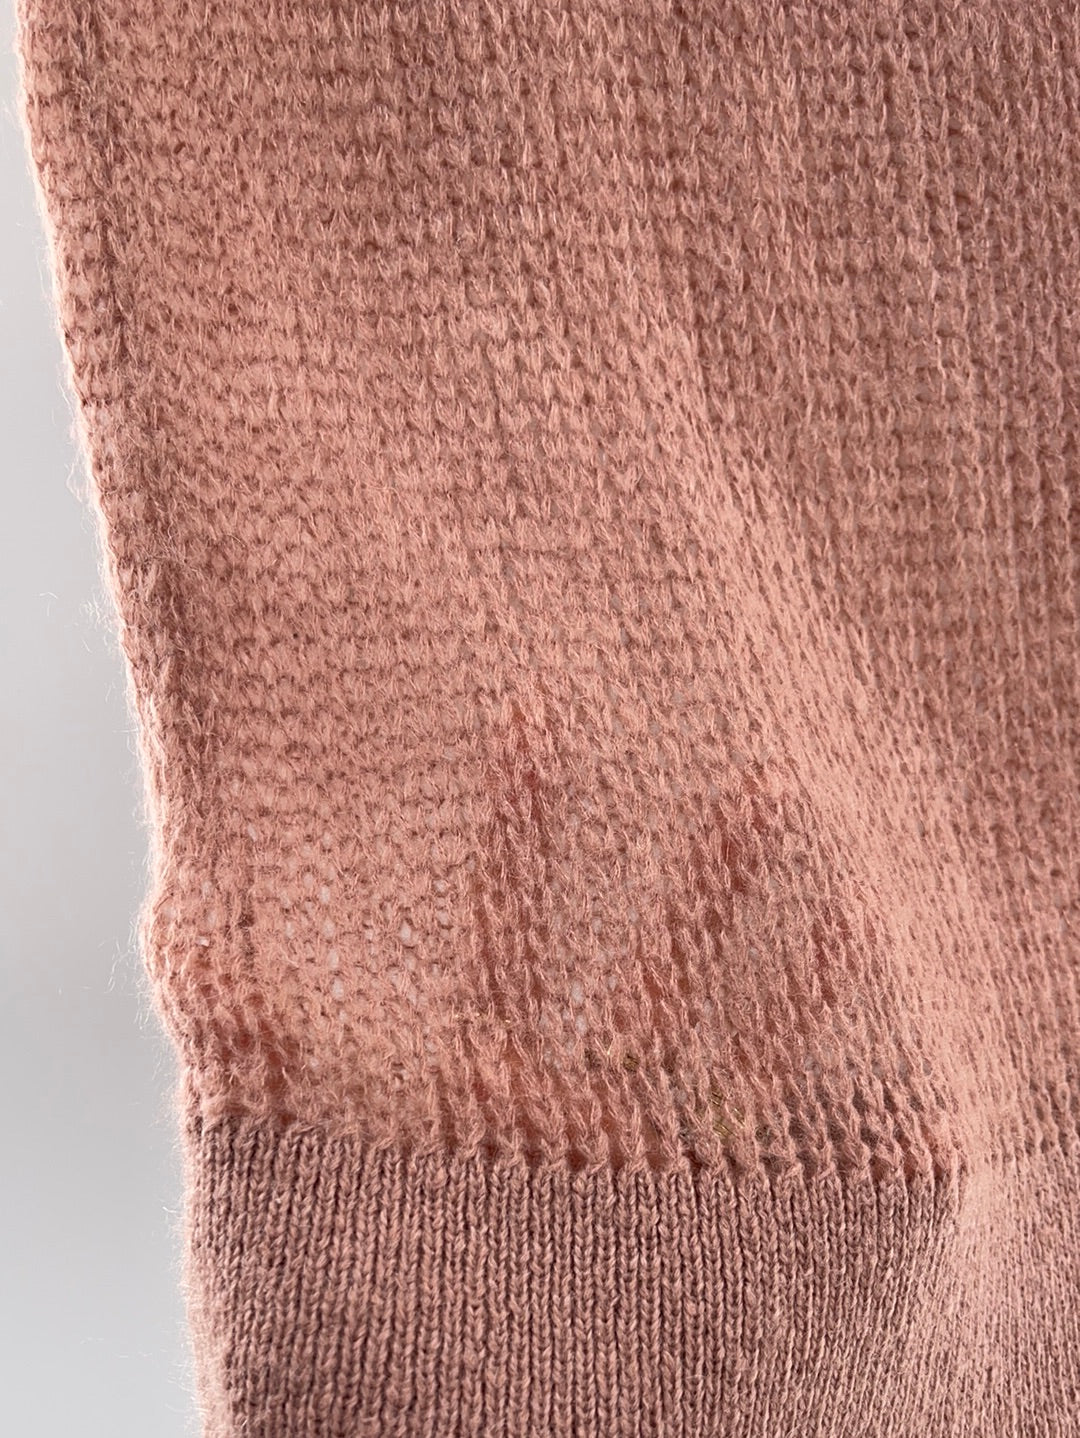 Free People Sheer Knit Off Dusty Pink Sweater (Size XS)